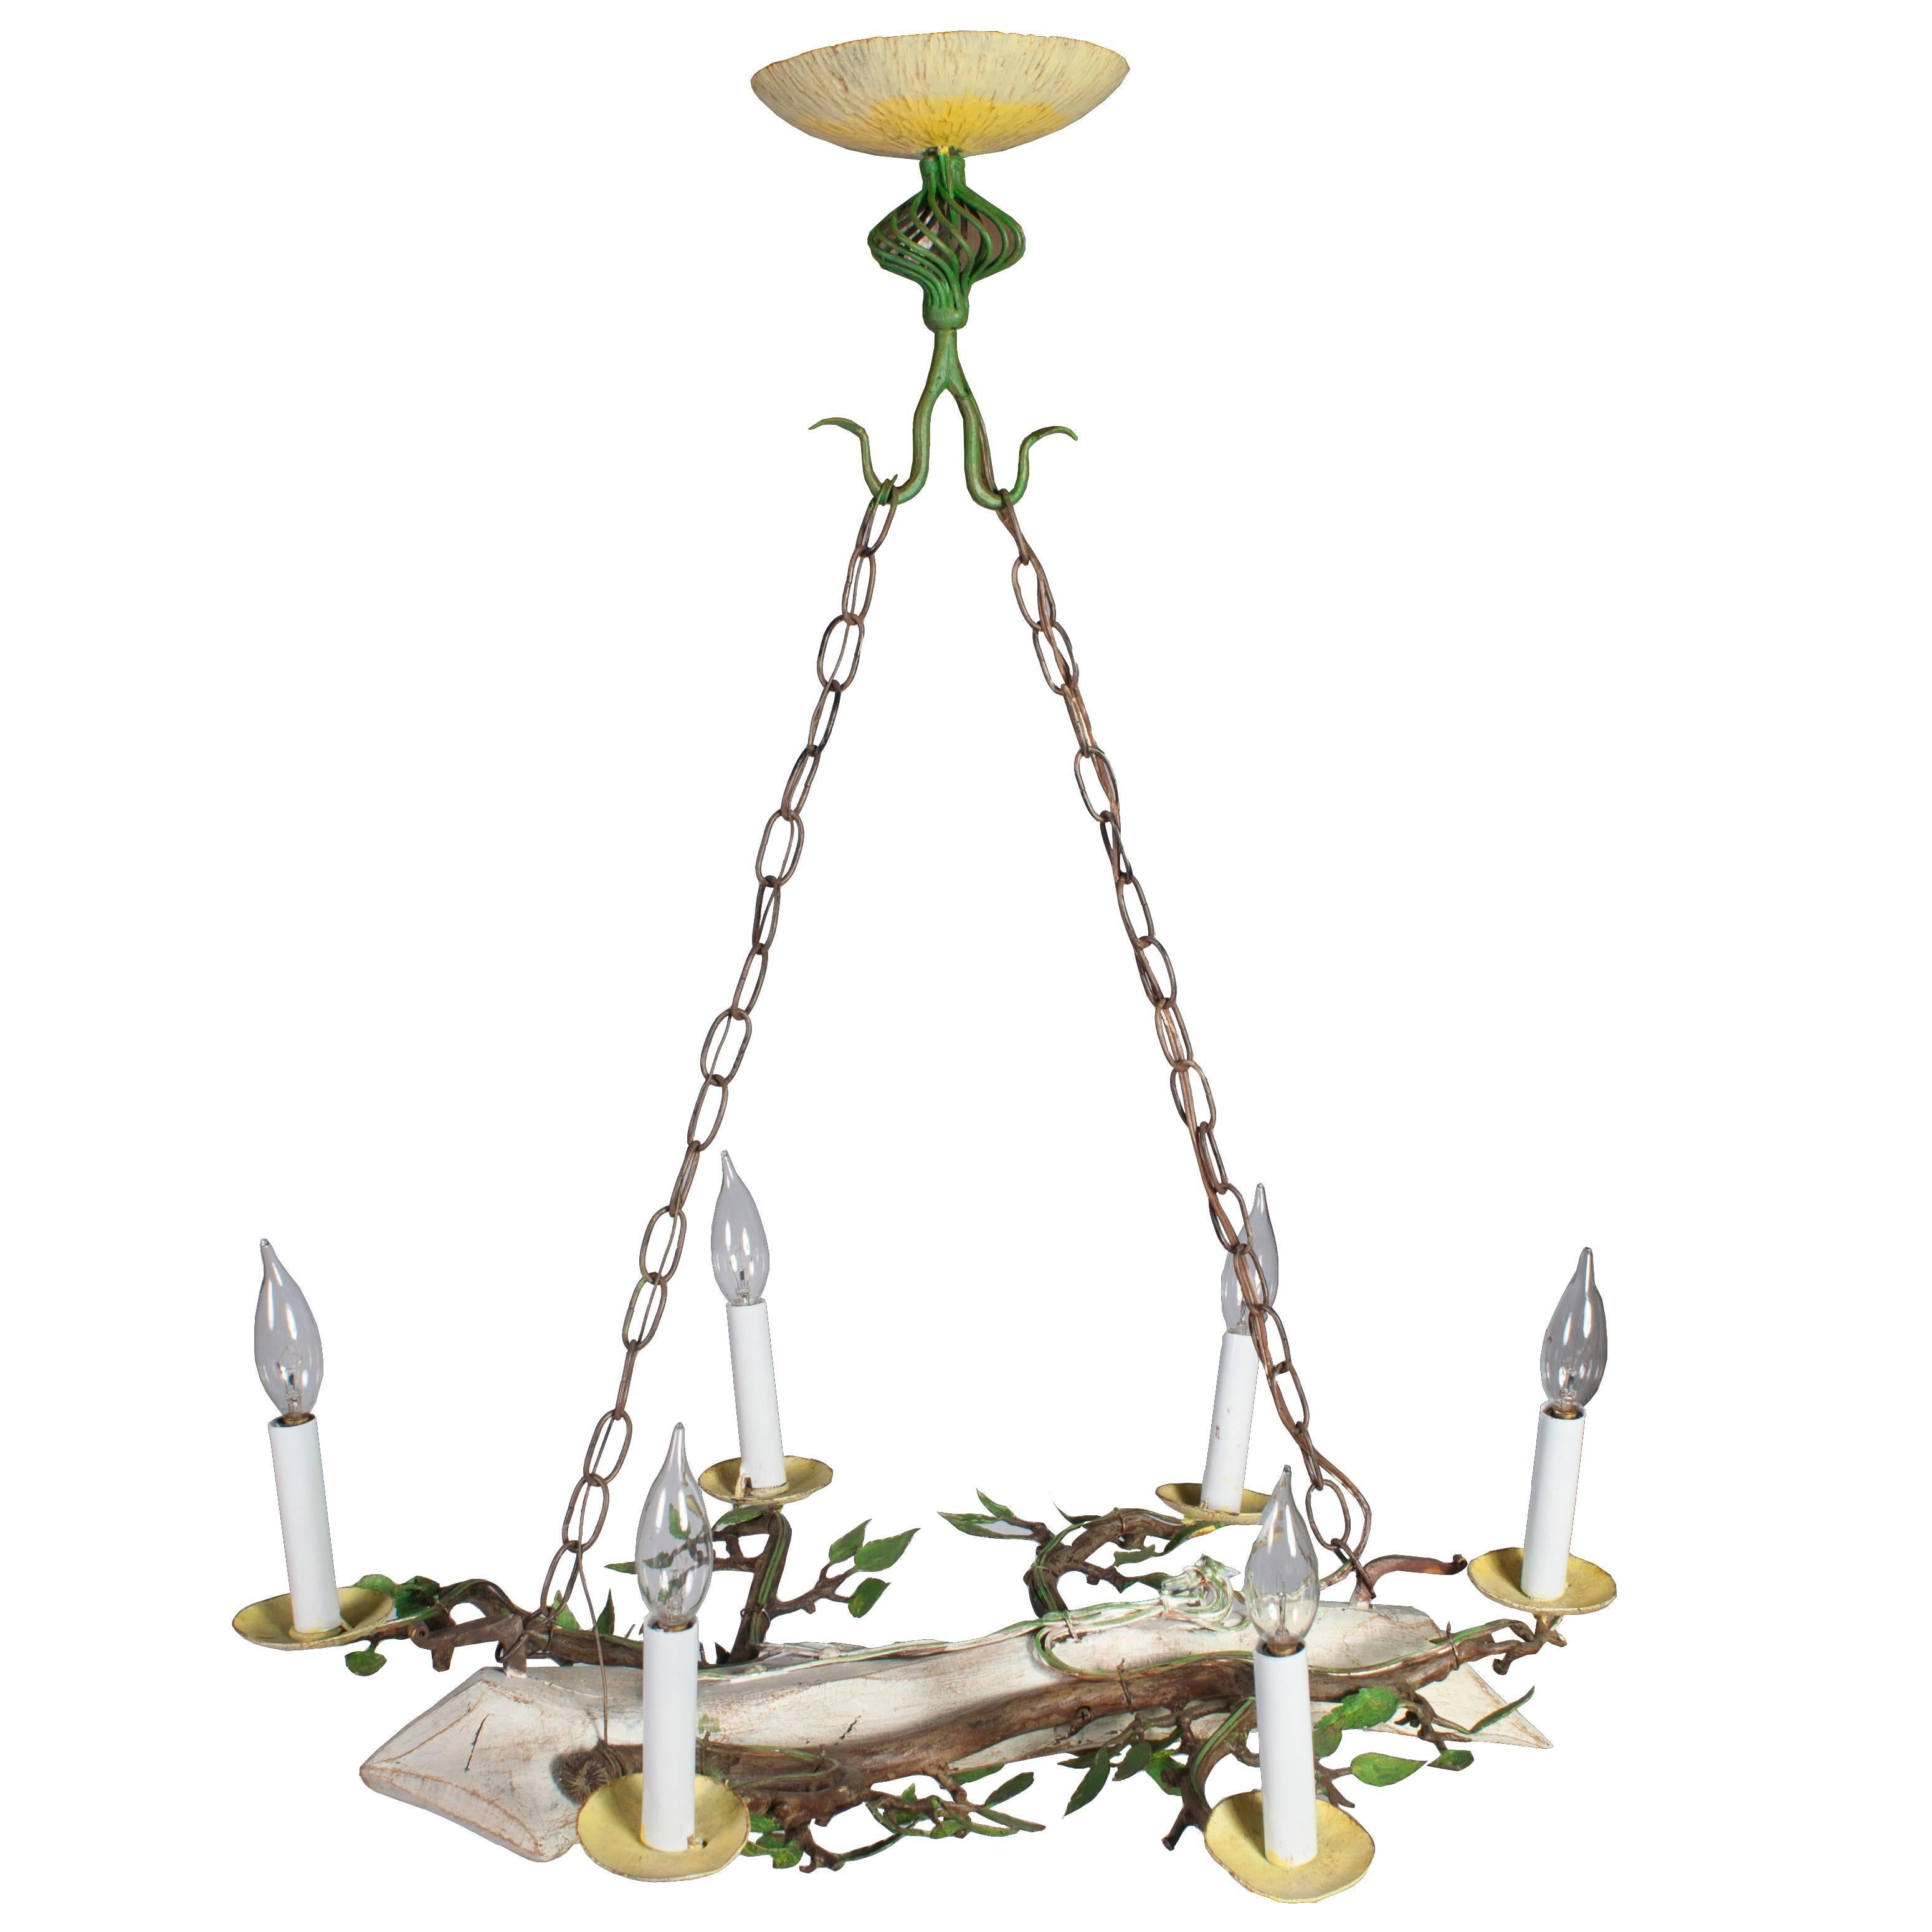 Small Yellow, Green Painted Chandelier in the Form of a Log, with Leaves For Sale